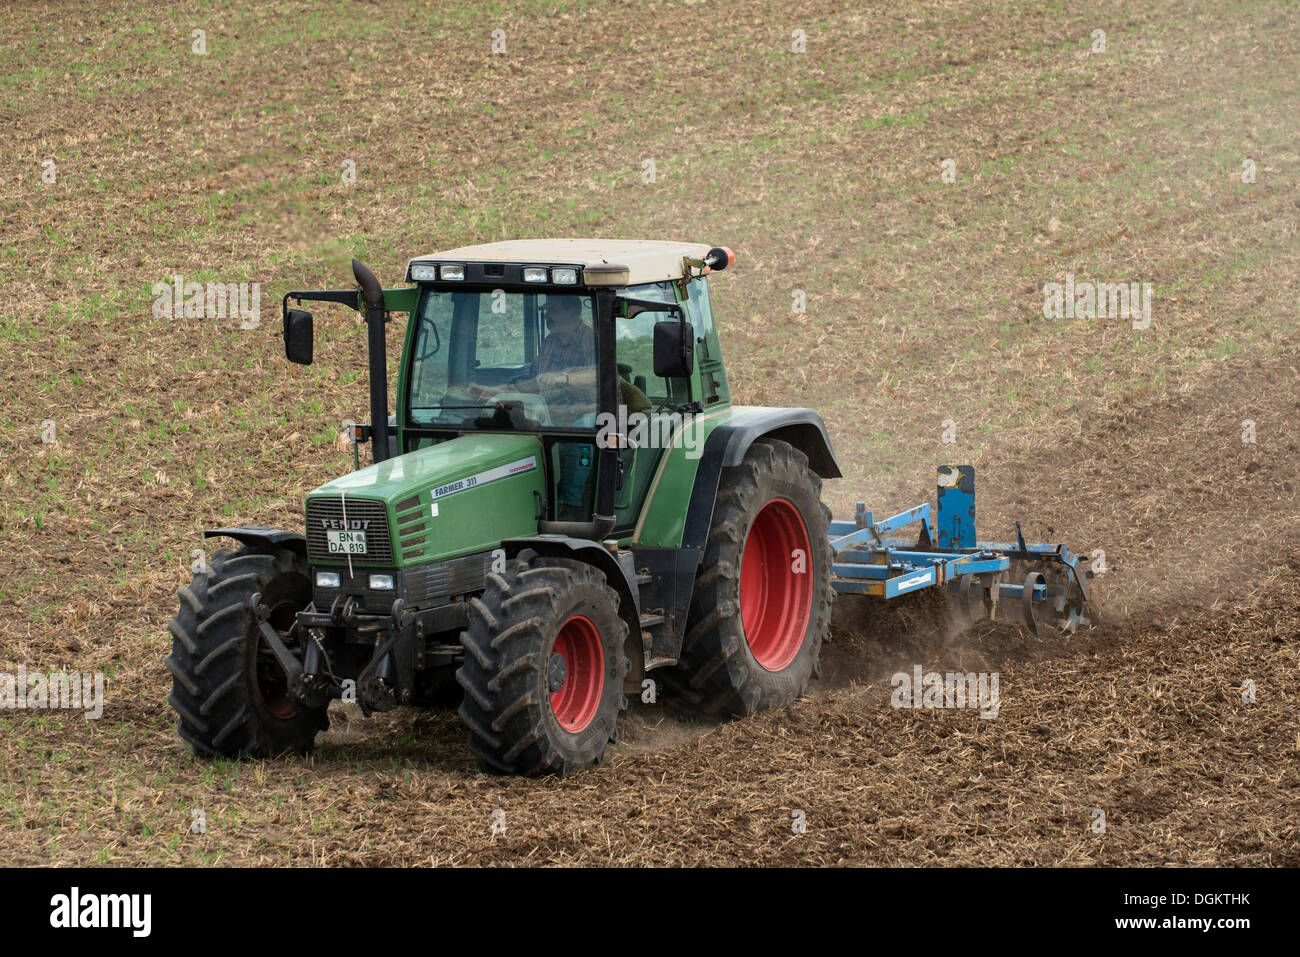 Tractor with a cultivator on farmland, PublicGround Stock Photo